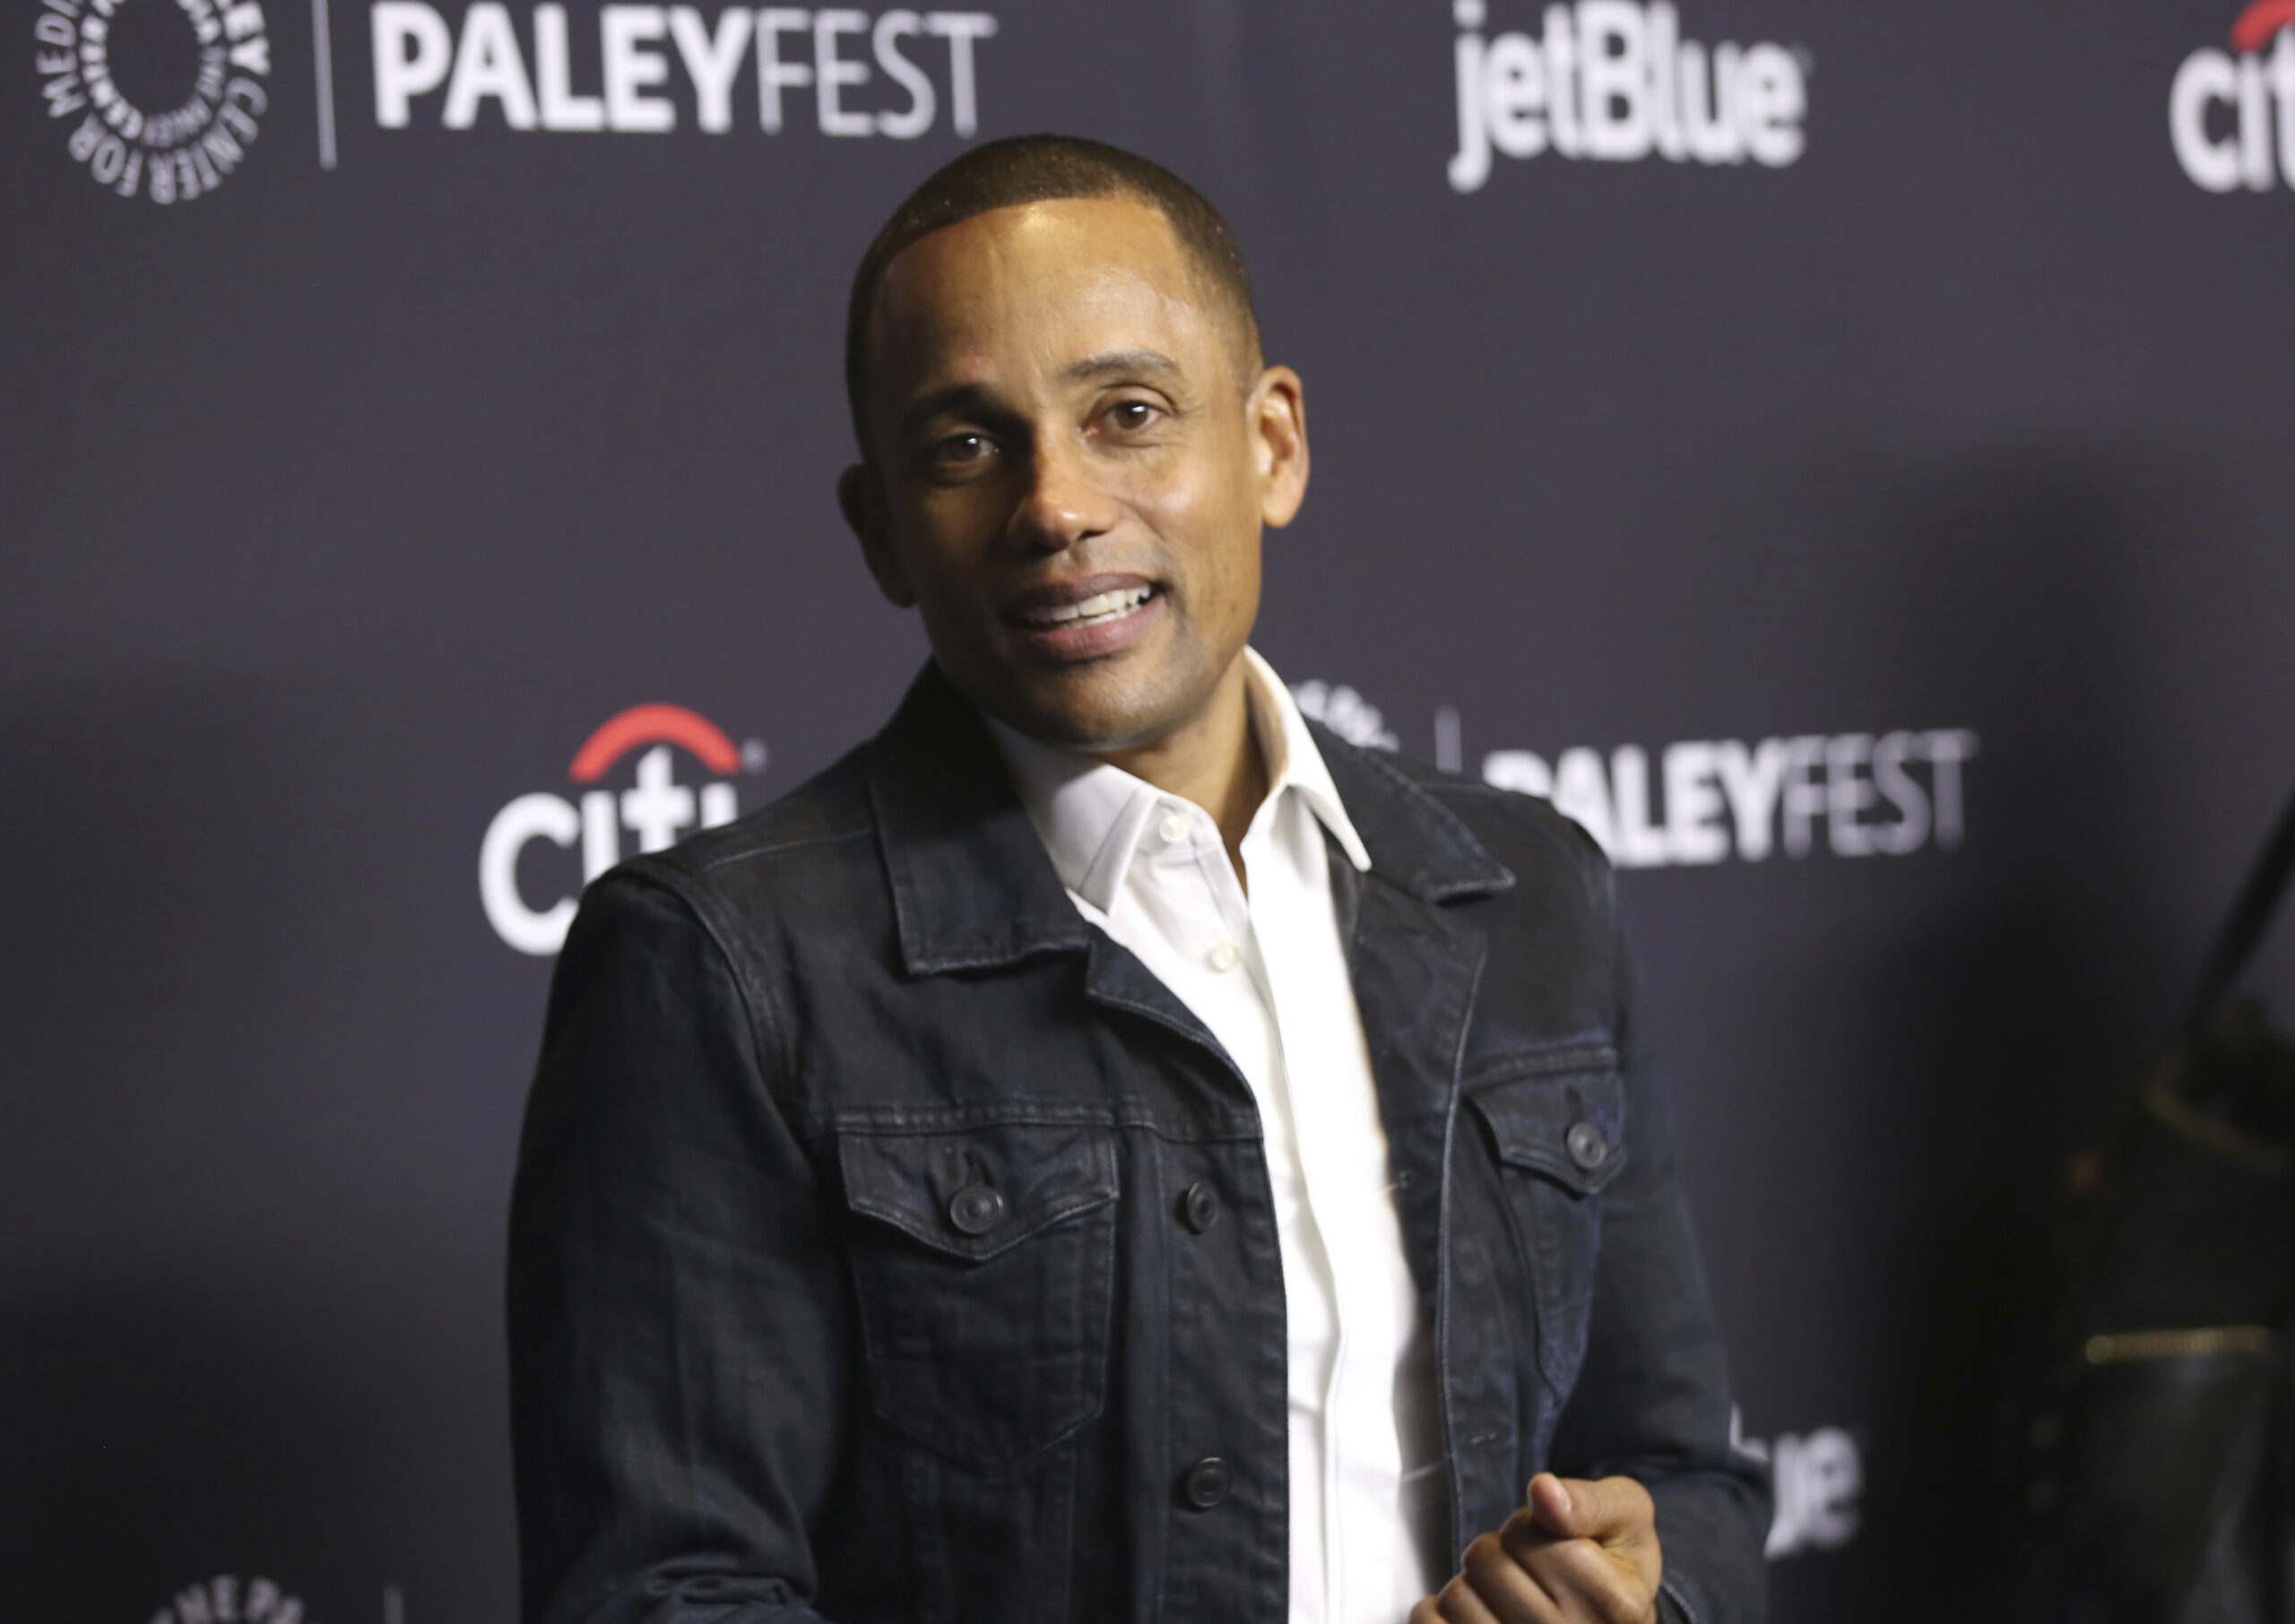 Hill Harper, a cast member in the television series "The Good Doctor" arrives at the 35th Annual PaleyFest at the Dolby Theatre on Thursday, March 22, 2018, in Los Angeles. Harper announced Monday, July 10, 2023 that he is running for Michigan's open U.S. Senate seat and challenging U.S. Rep. Elissa Slotkin for the Democratic nomination. Harper is the sixth Democratic candidate to enter the race for retiring Democratic Sen. Debbie Stabenow's seat. (Photo credit: Willy Sanjuan, Invision, The Associated Press